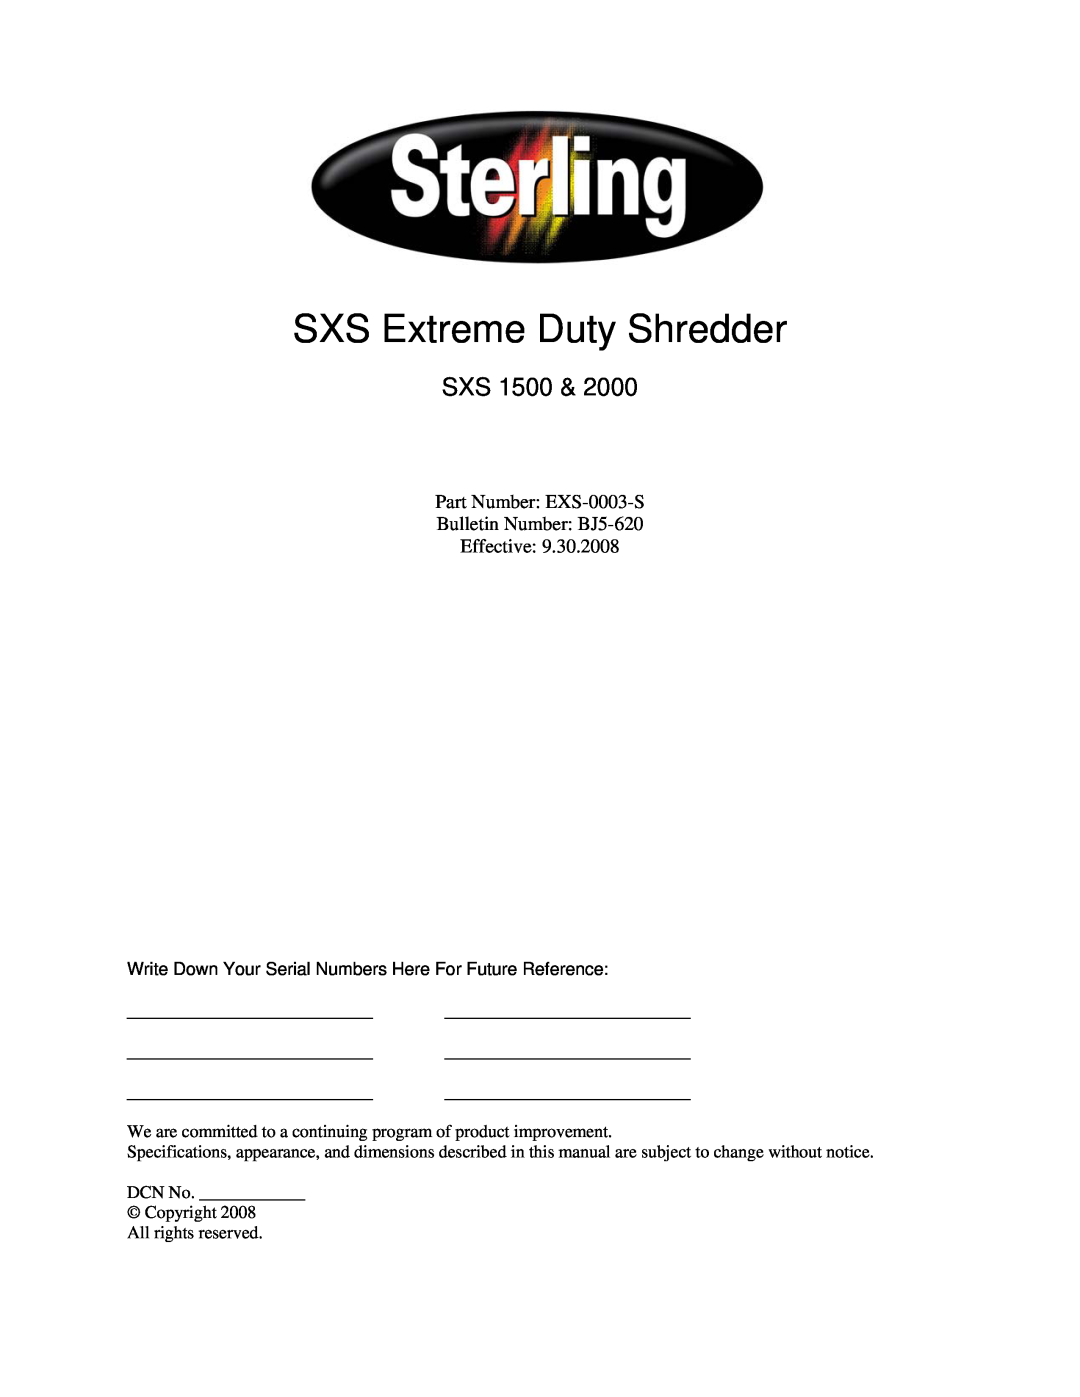 Sterling SXS Series specifications SXS Extreme Duty Shredder, Sxs 